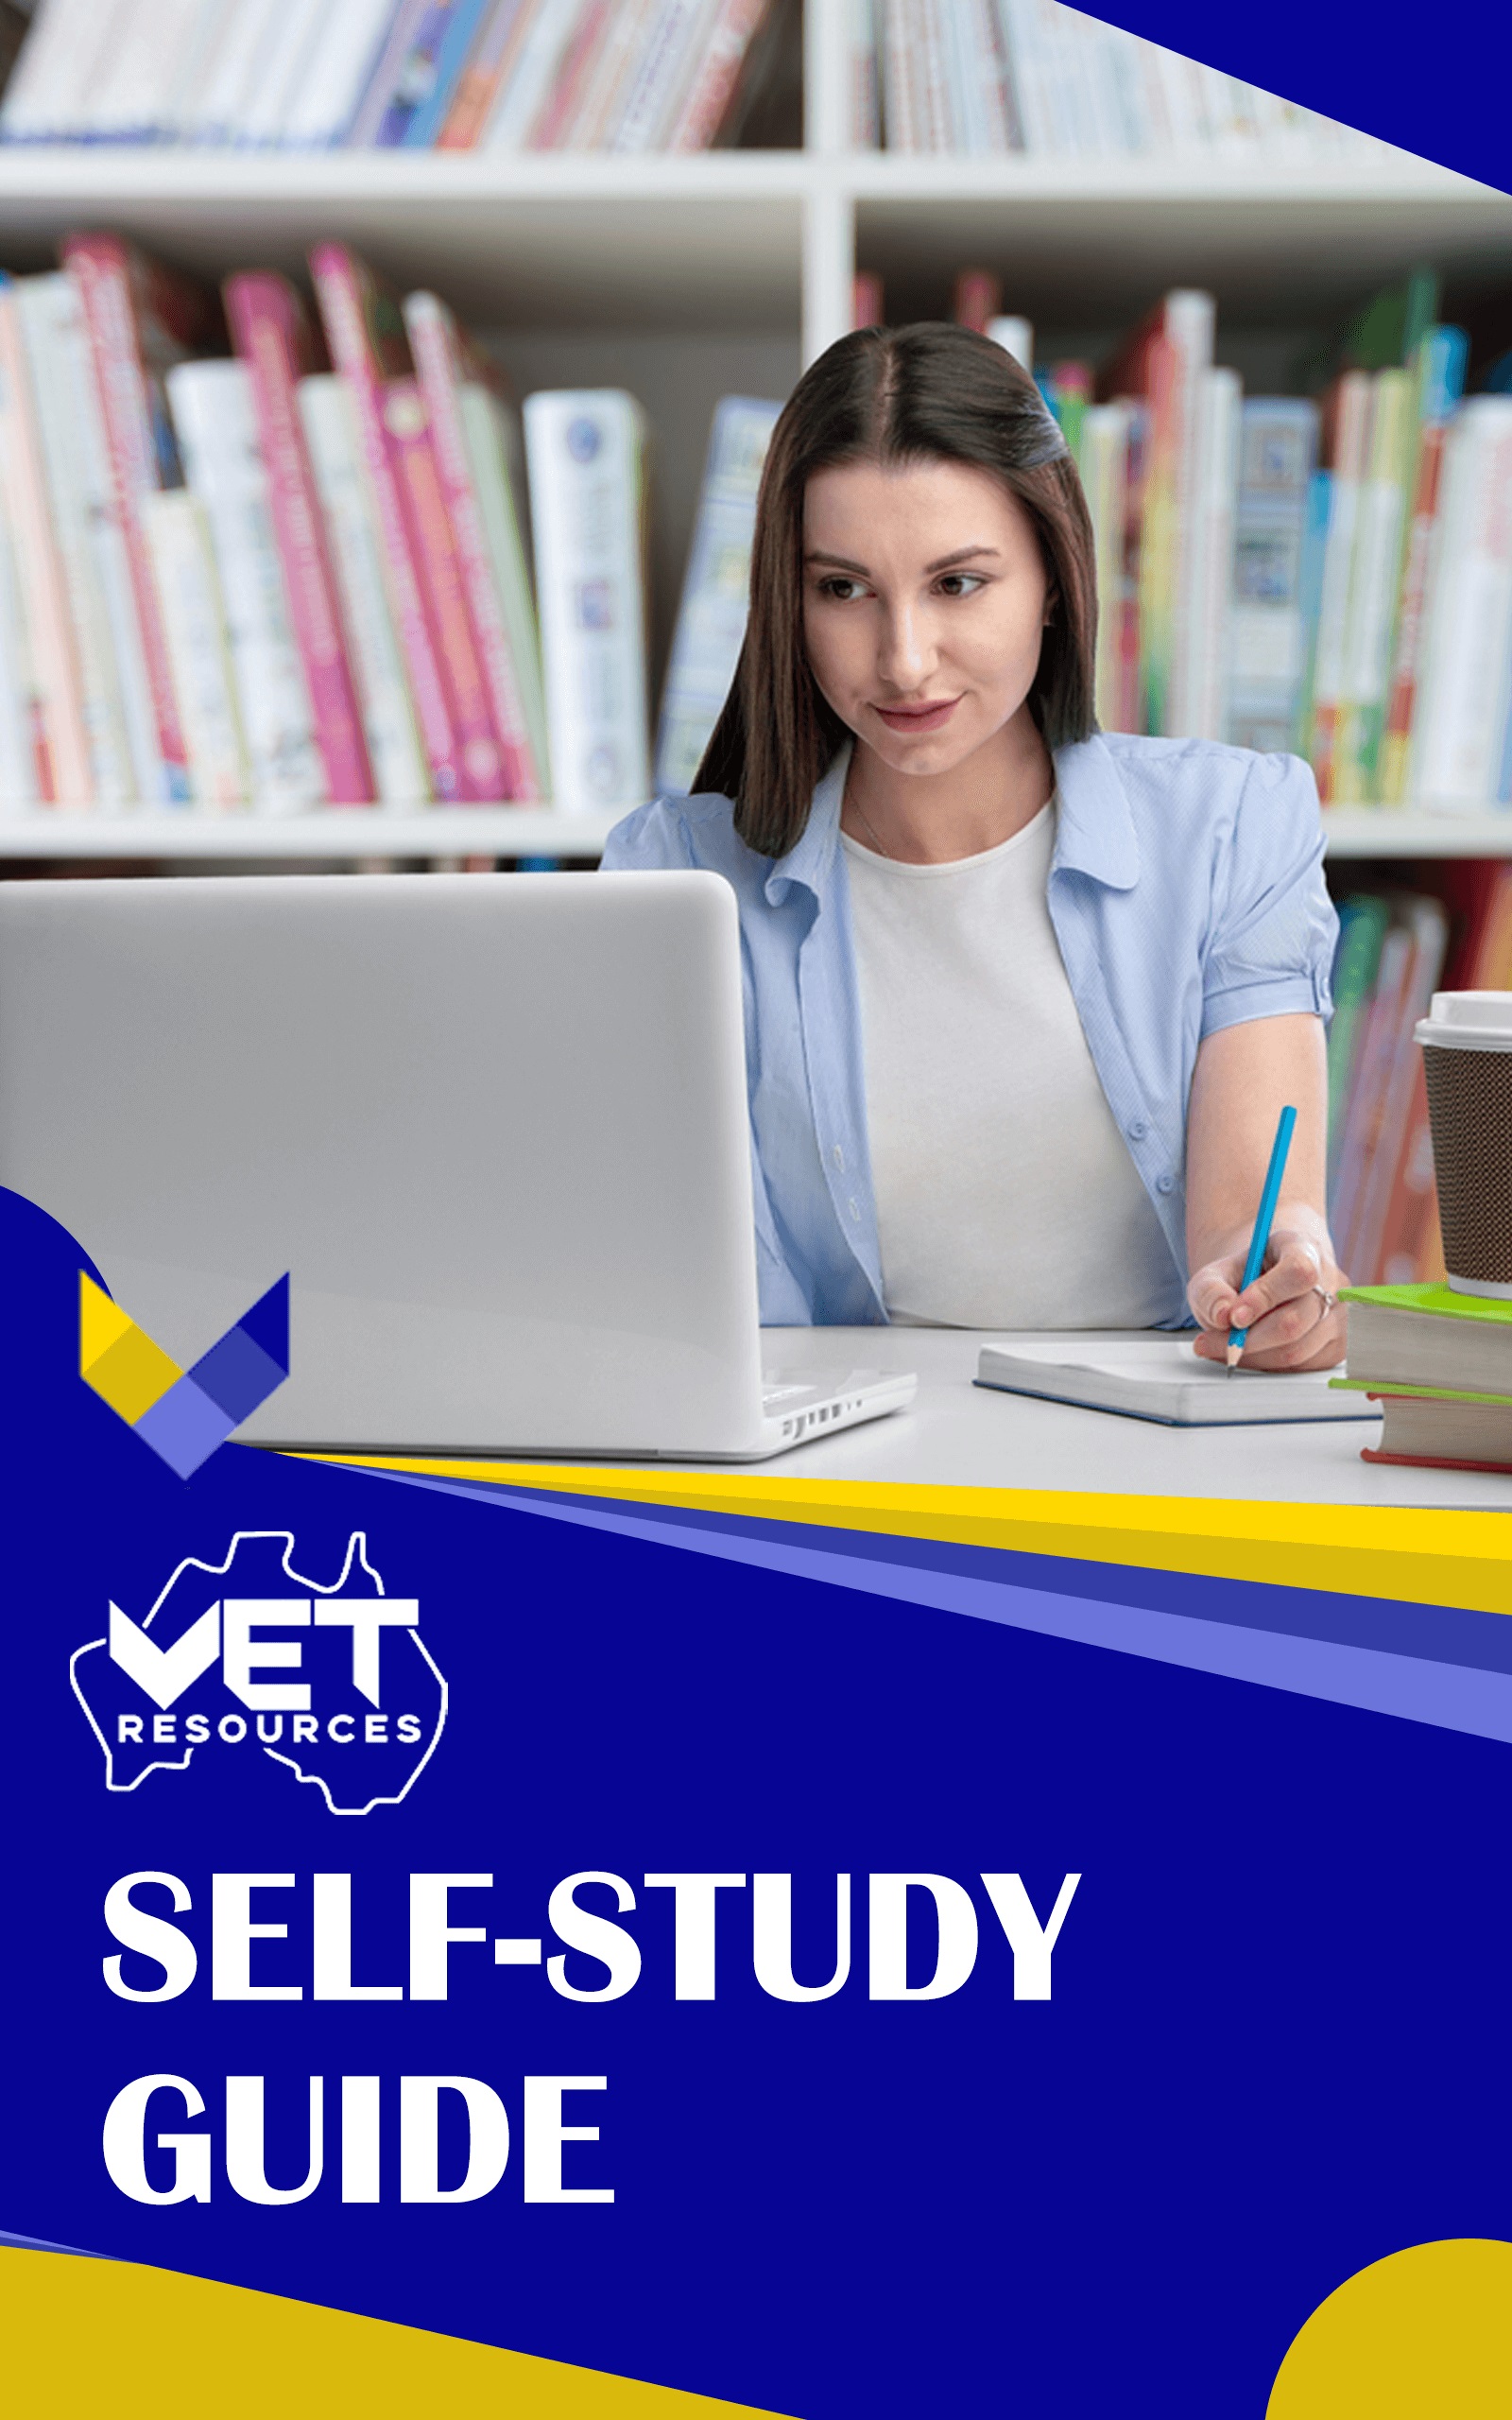 Self-Study Guide - VU22615 - Investigate issues in the Australian environment